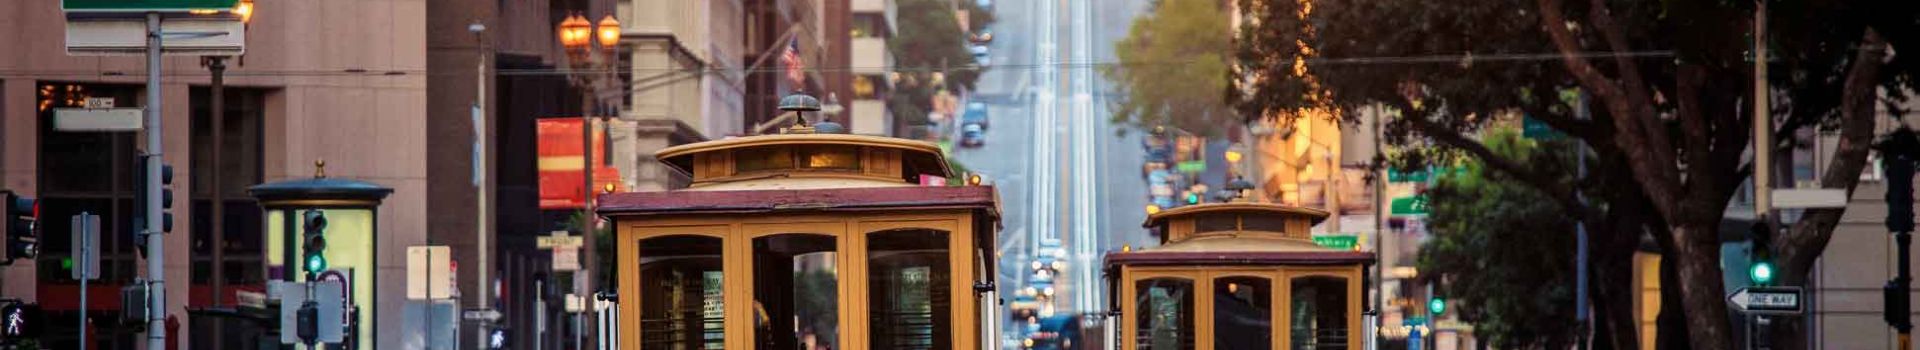 American Holidays to San Francisco with Cassidy Travel